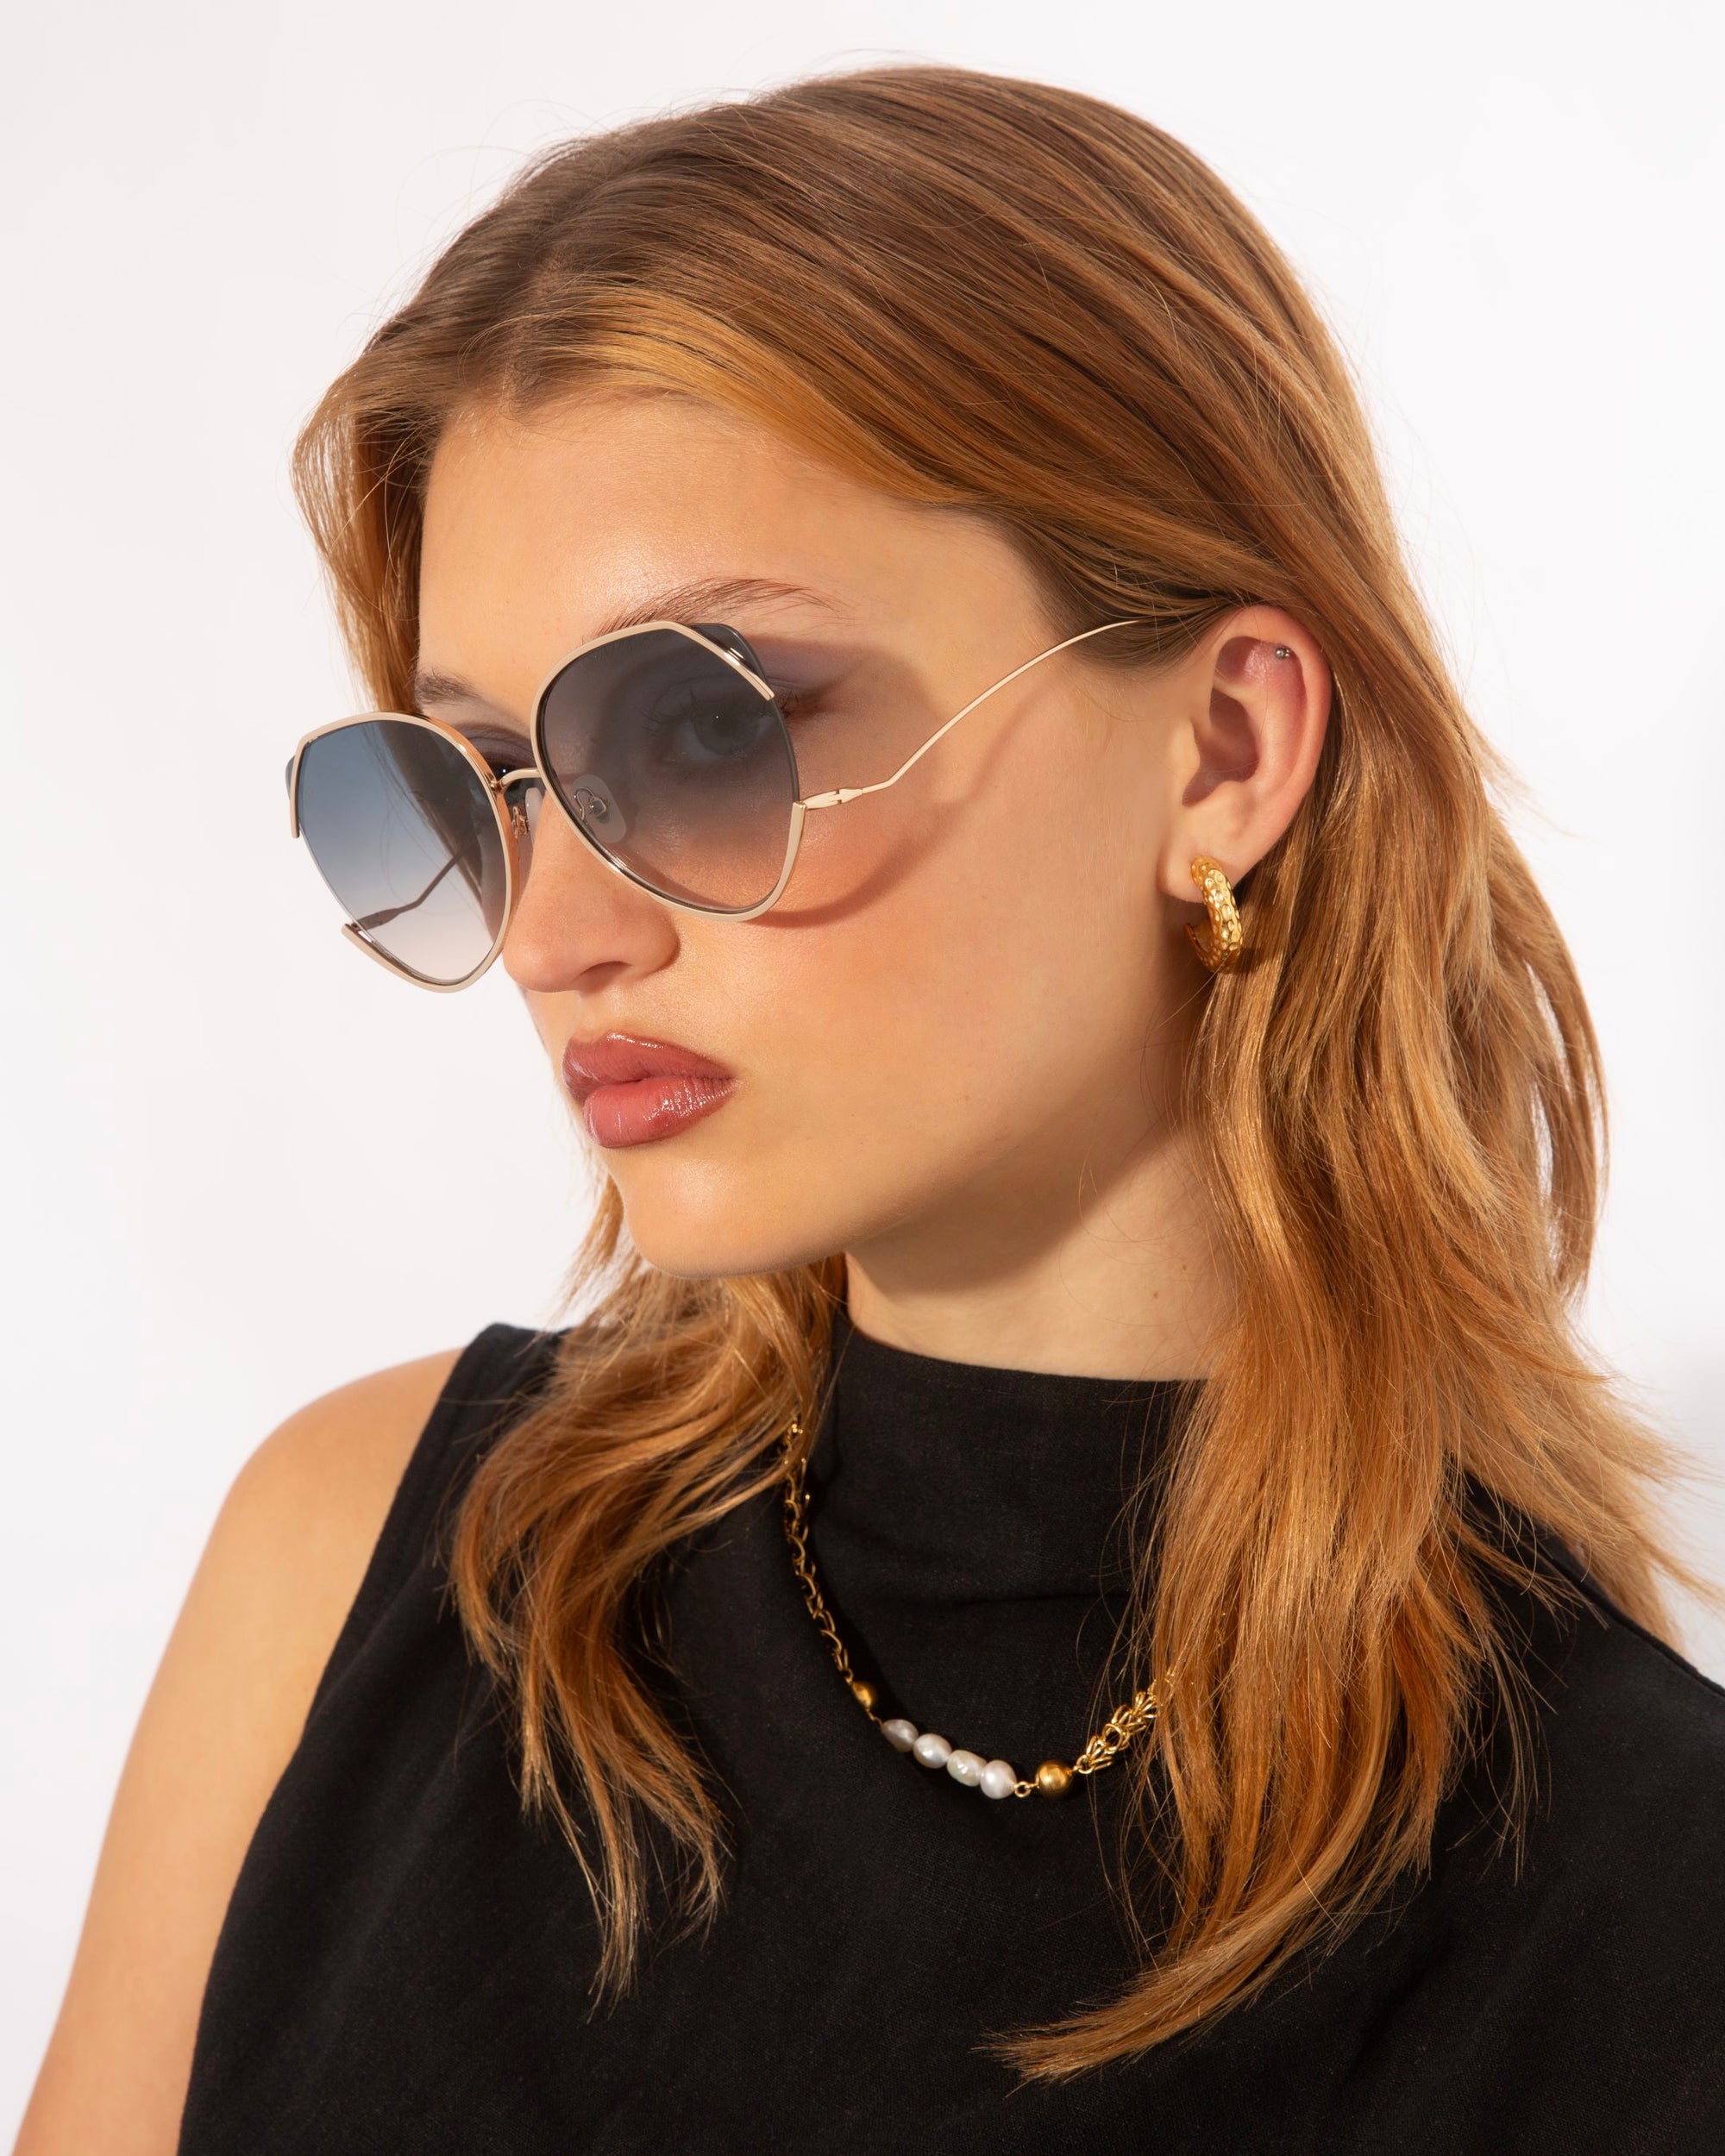 A woman with medium-length, light brown hair is wearing large, round For Art&#39;s Sake® Wonderland sunglasses with adjustable nosepads and 100% UV protection. She has a serious expression and is accessorized with gold hoop earrings and a gold necklace with small white beads. Her sleeveless black top stands out against the plain white background.